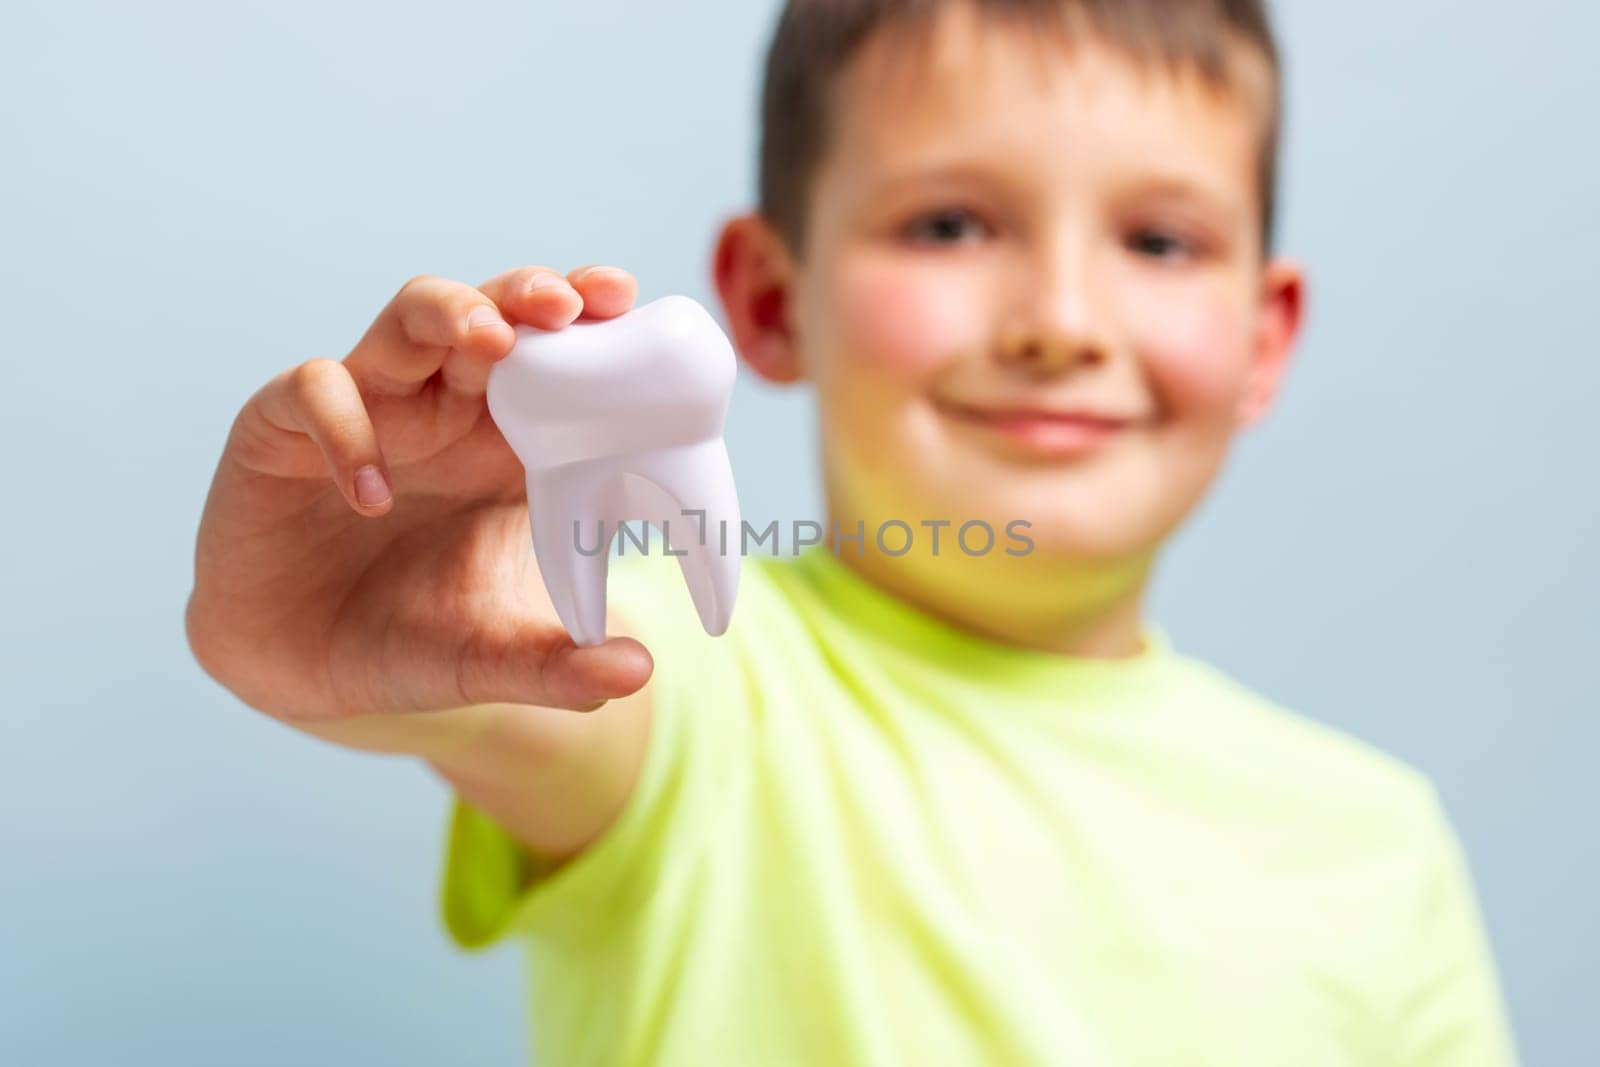 Child holds big white toy tooth on a blue background. Caring for teeth. Dentistry and healthcare concept. Healthy teeth concept.